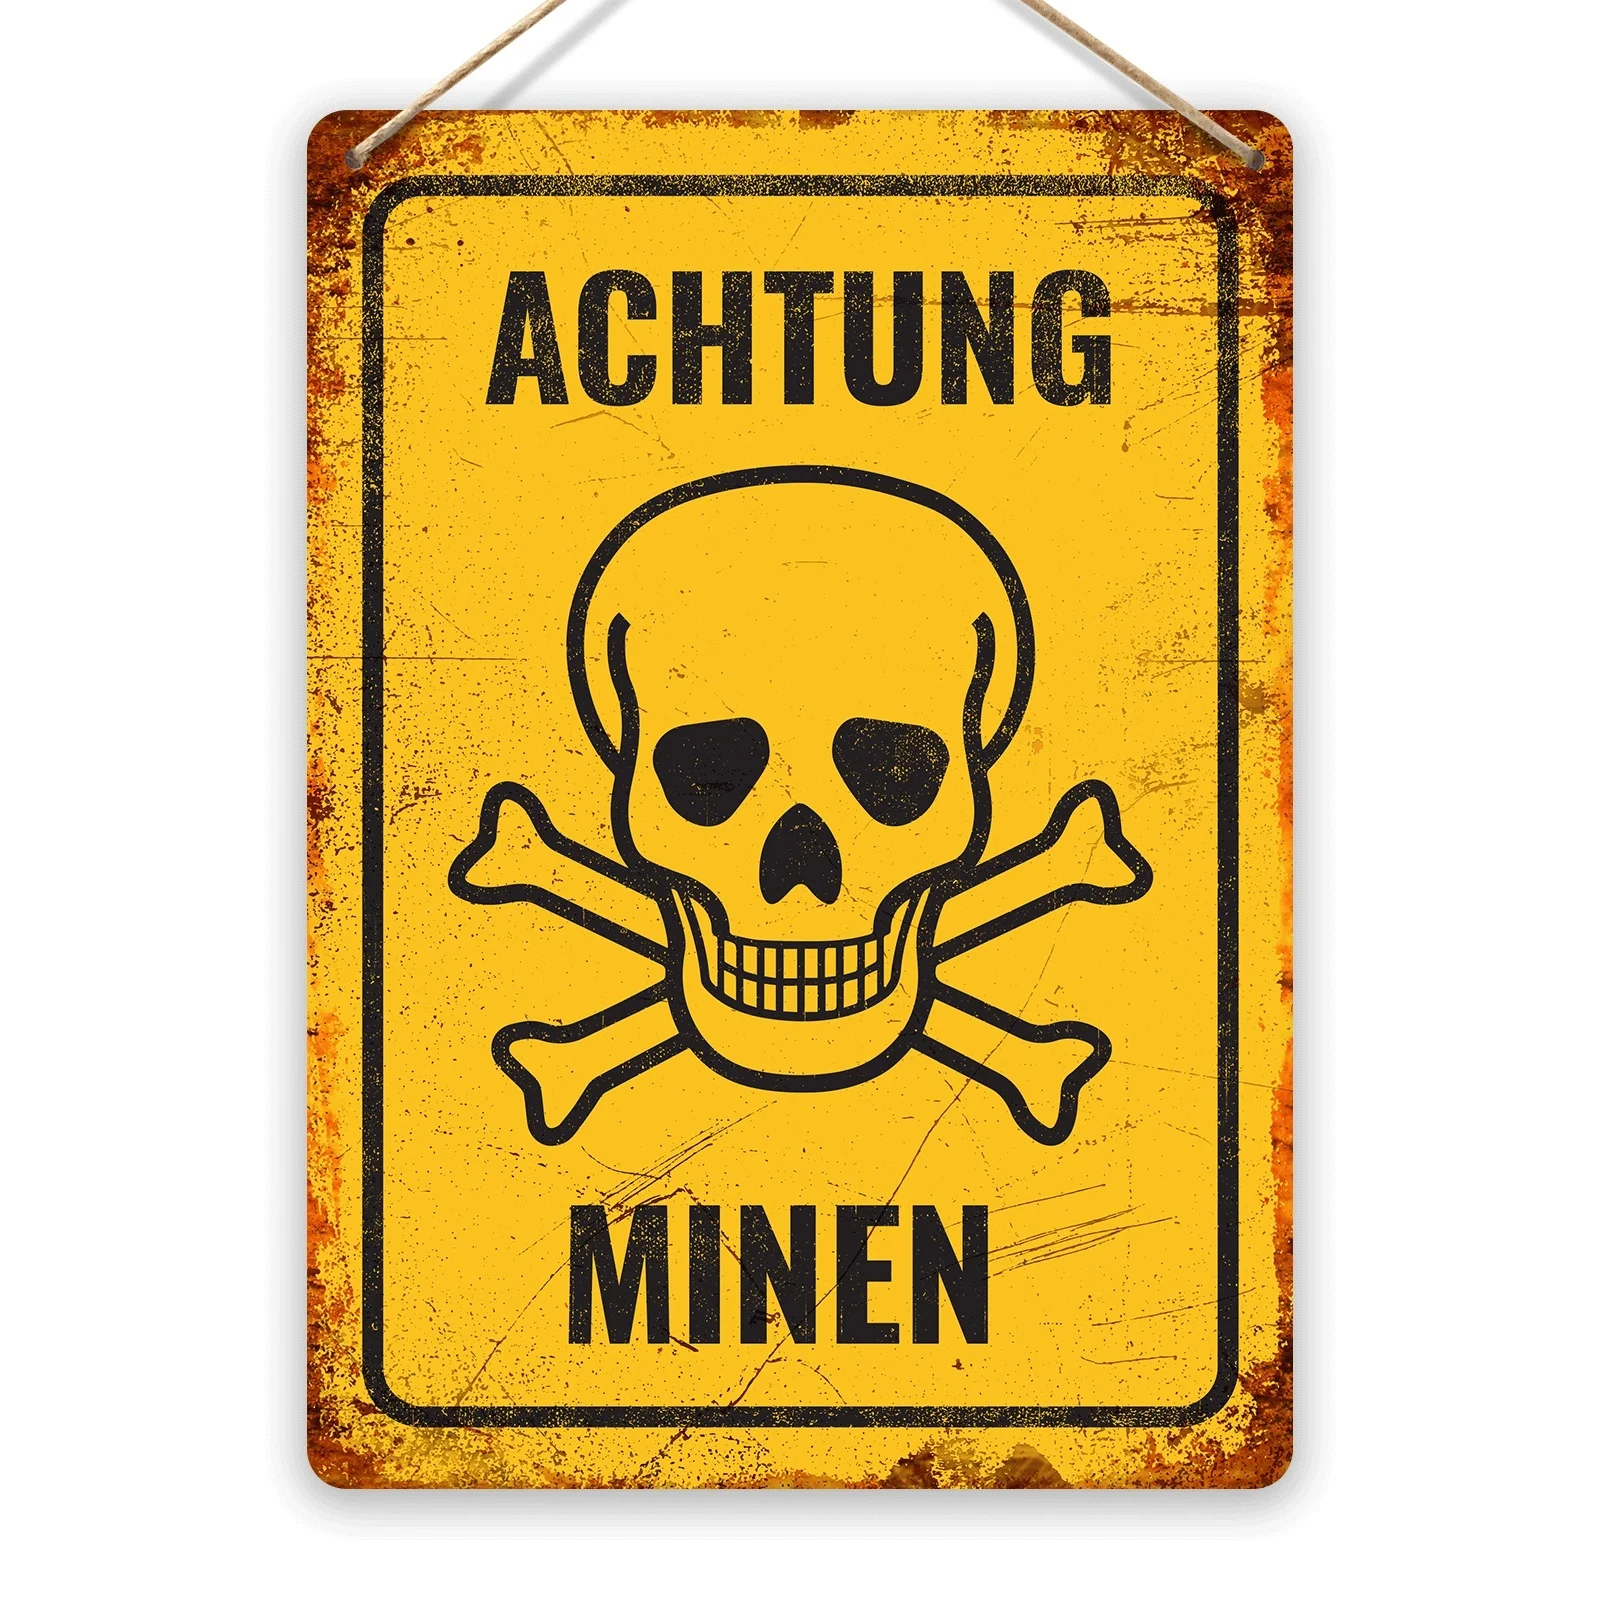 

Achtung Minen! - Metal Wall Sign Plaque Art - Soldiers Army Reenactment Replica(Visit Our Store, More Products!!!)